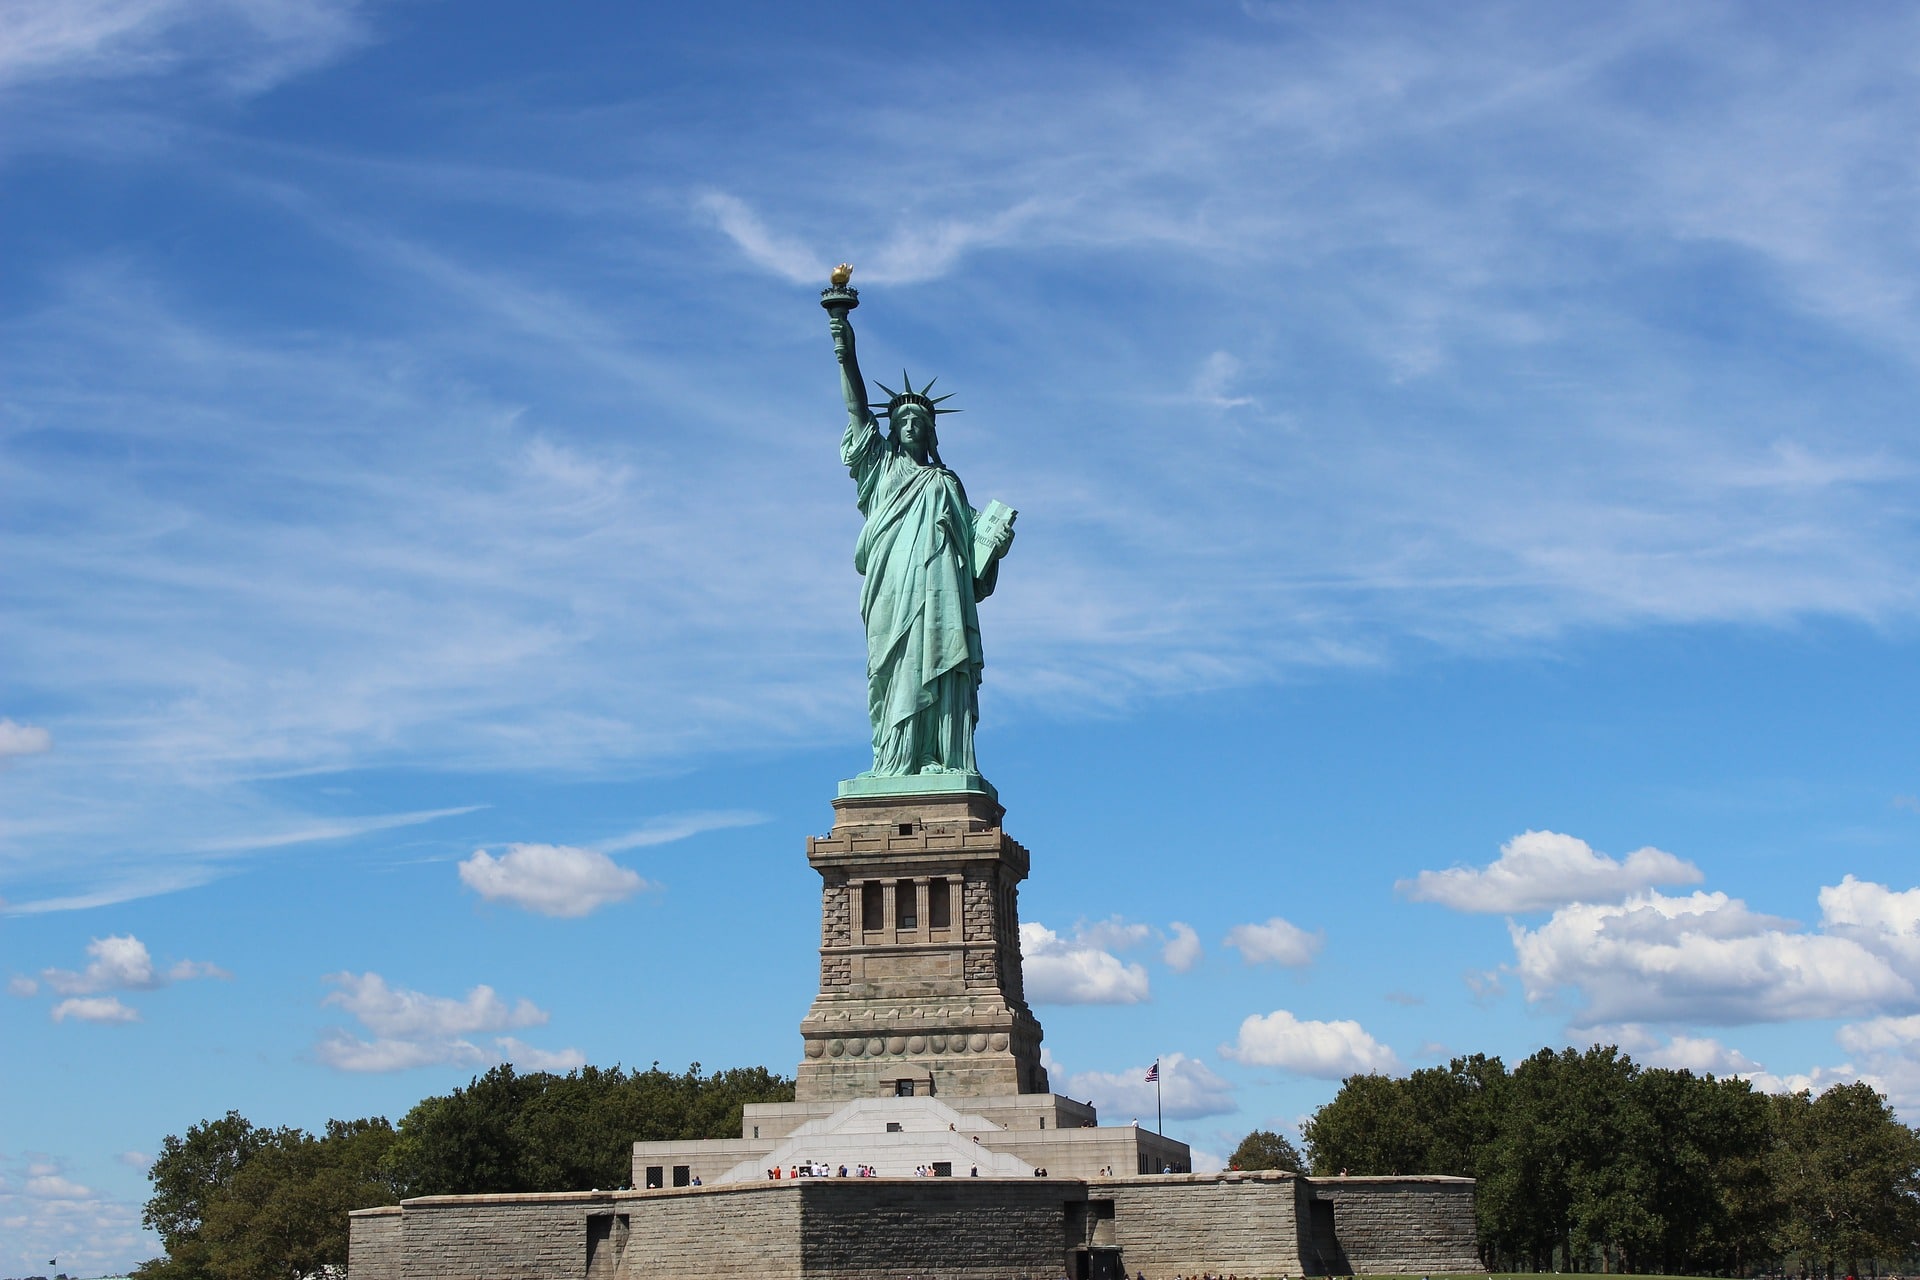 Statue of Liberty in a Day |